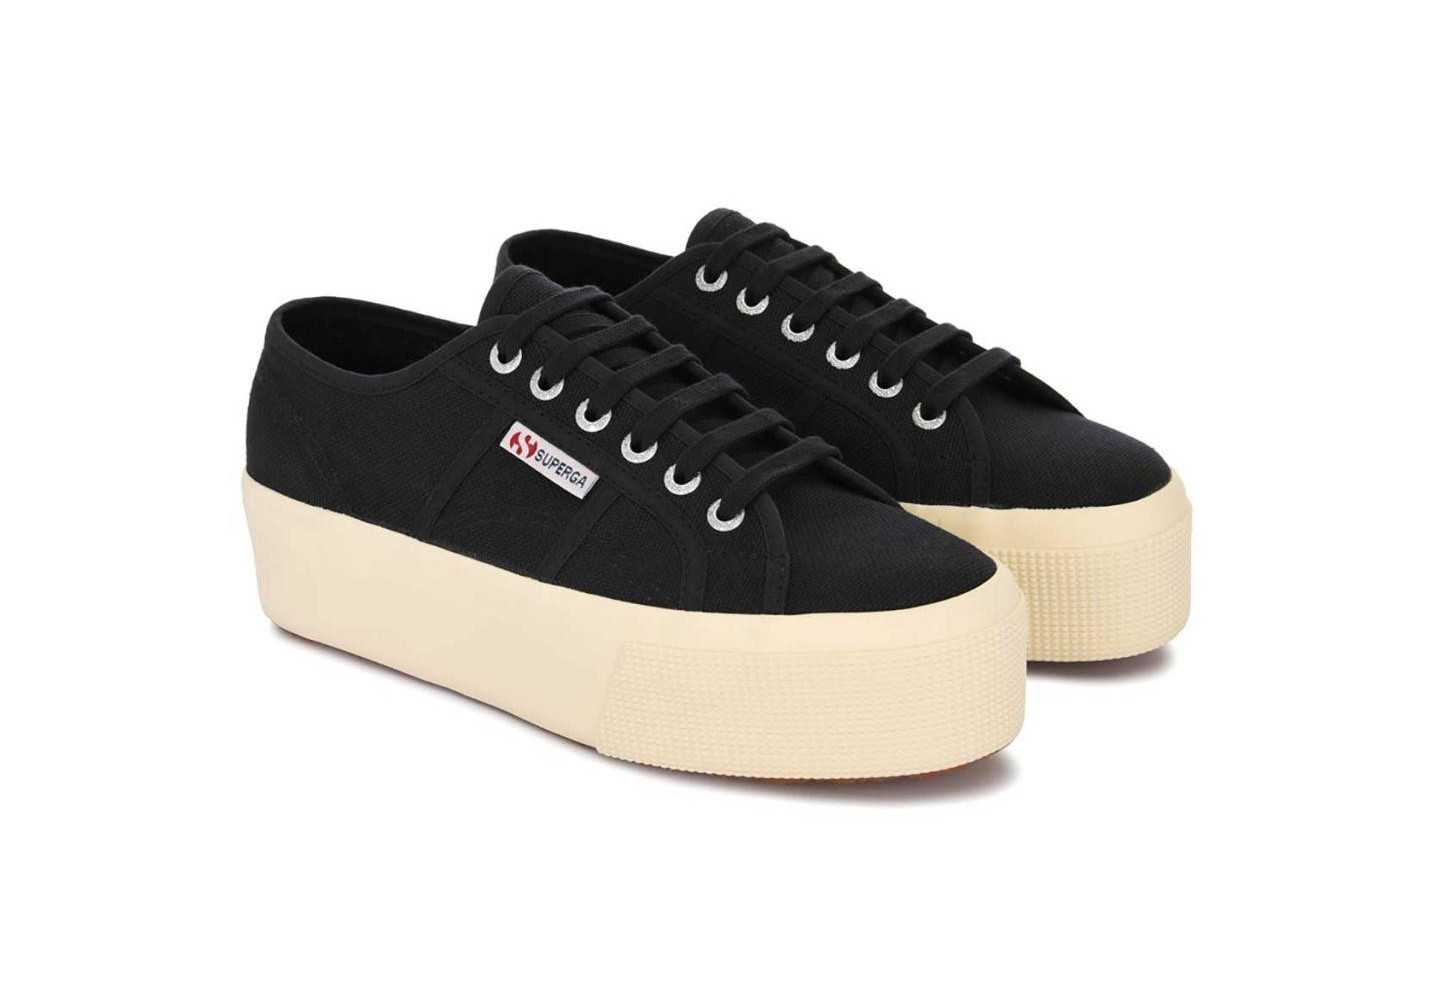 Sneakers da donna platform Superga 2790 up and down in tela